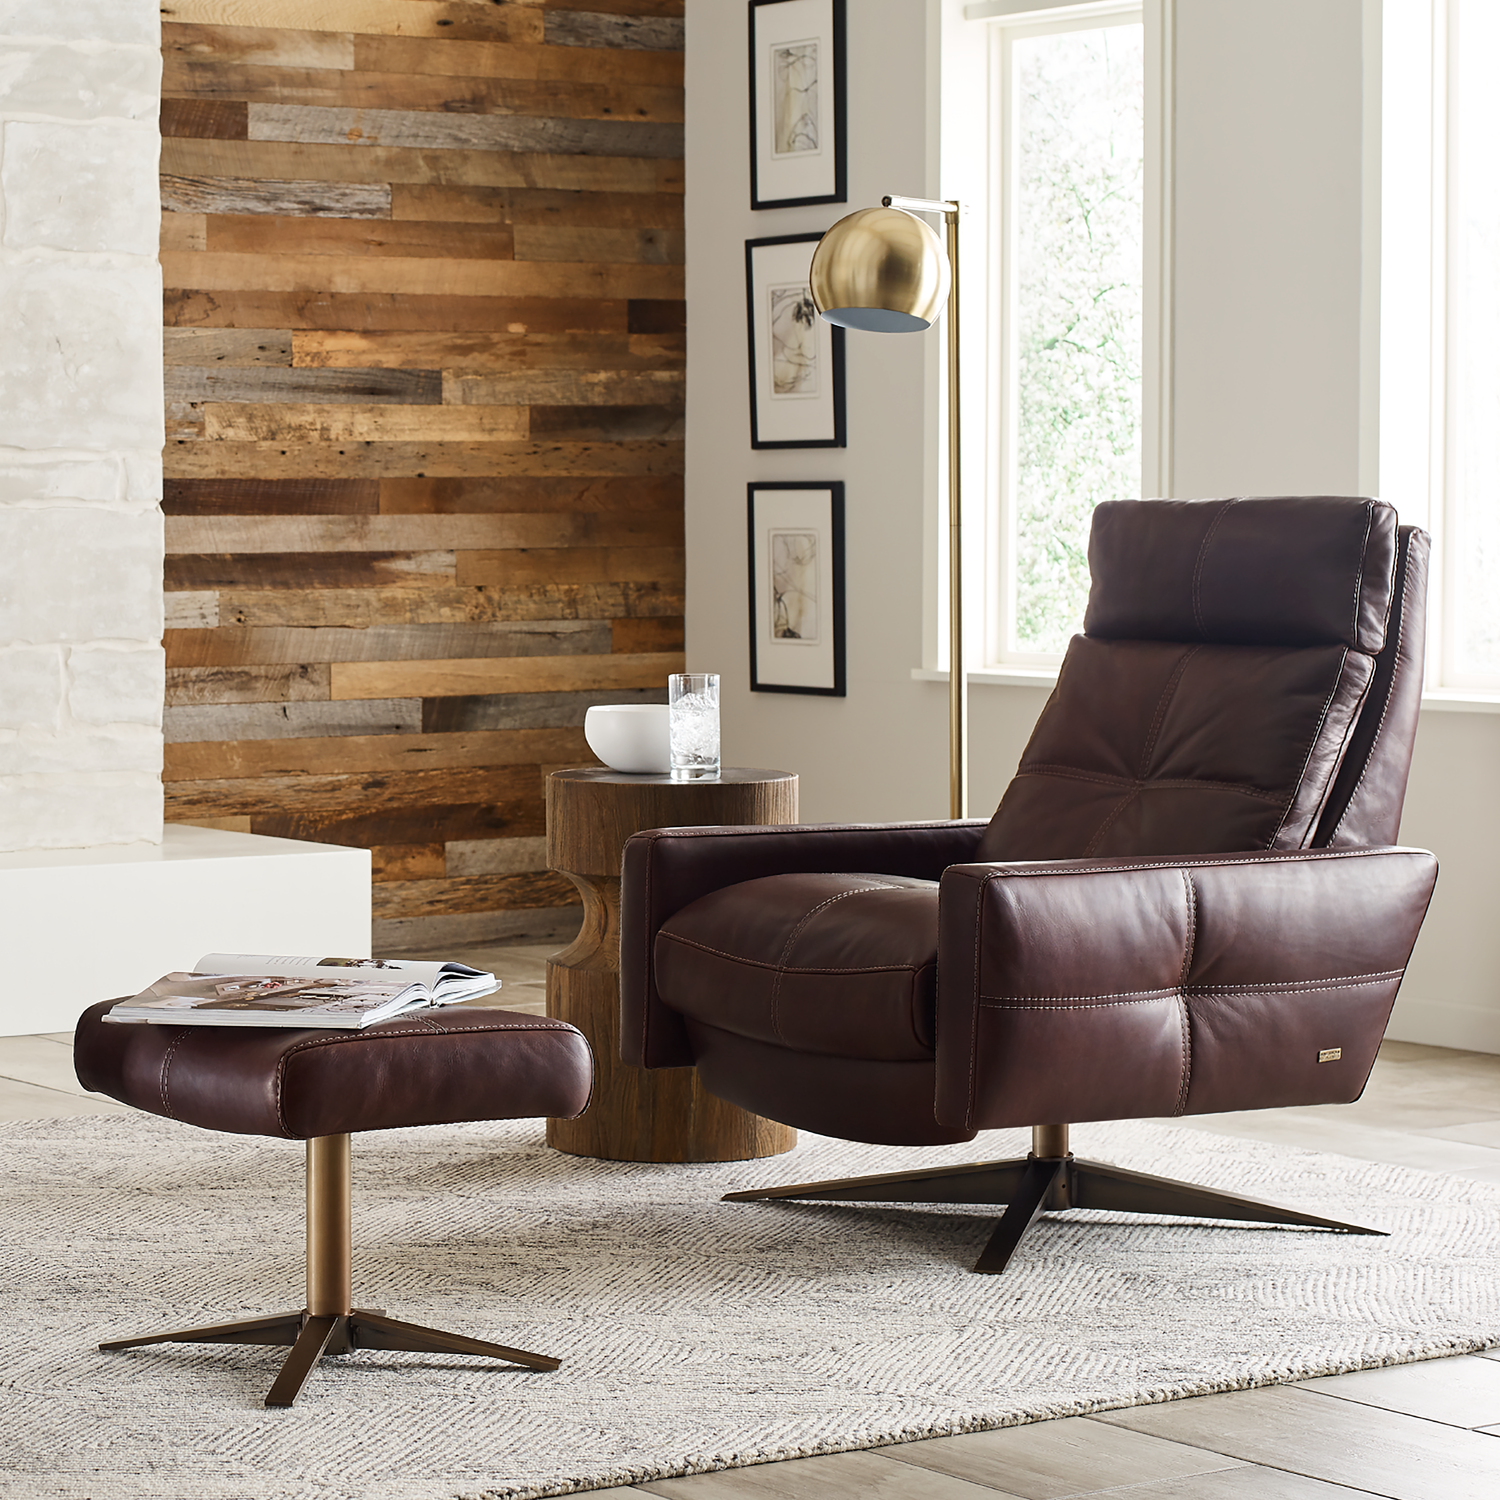 This fashion, function, and comfort all-in-one chair is a current day take on the traditional rocking chair but with so much more.  These chairs, glide, swivel, recline, and rock as they move with your body as you move.  You really have to experience it to understand how comfortable a chair like this actually is.